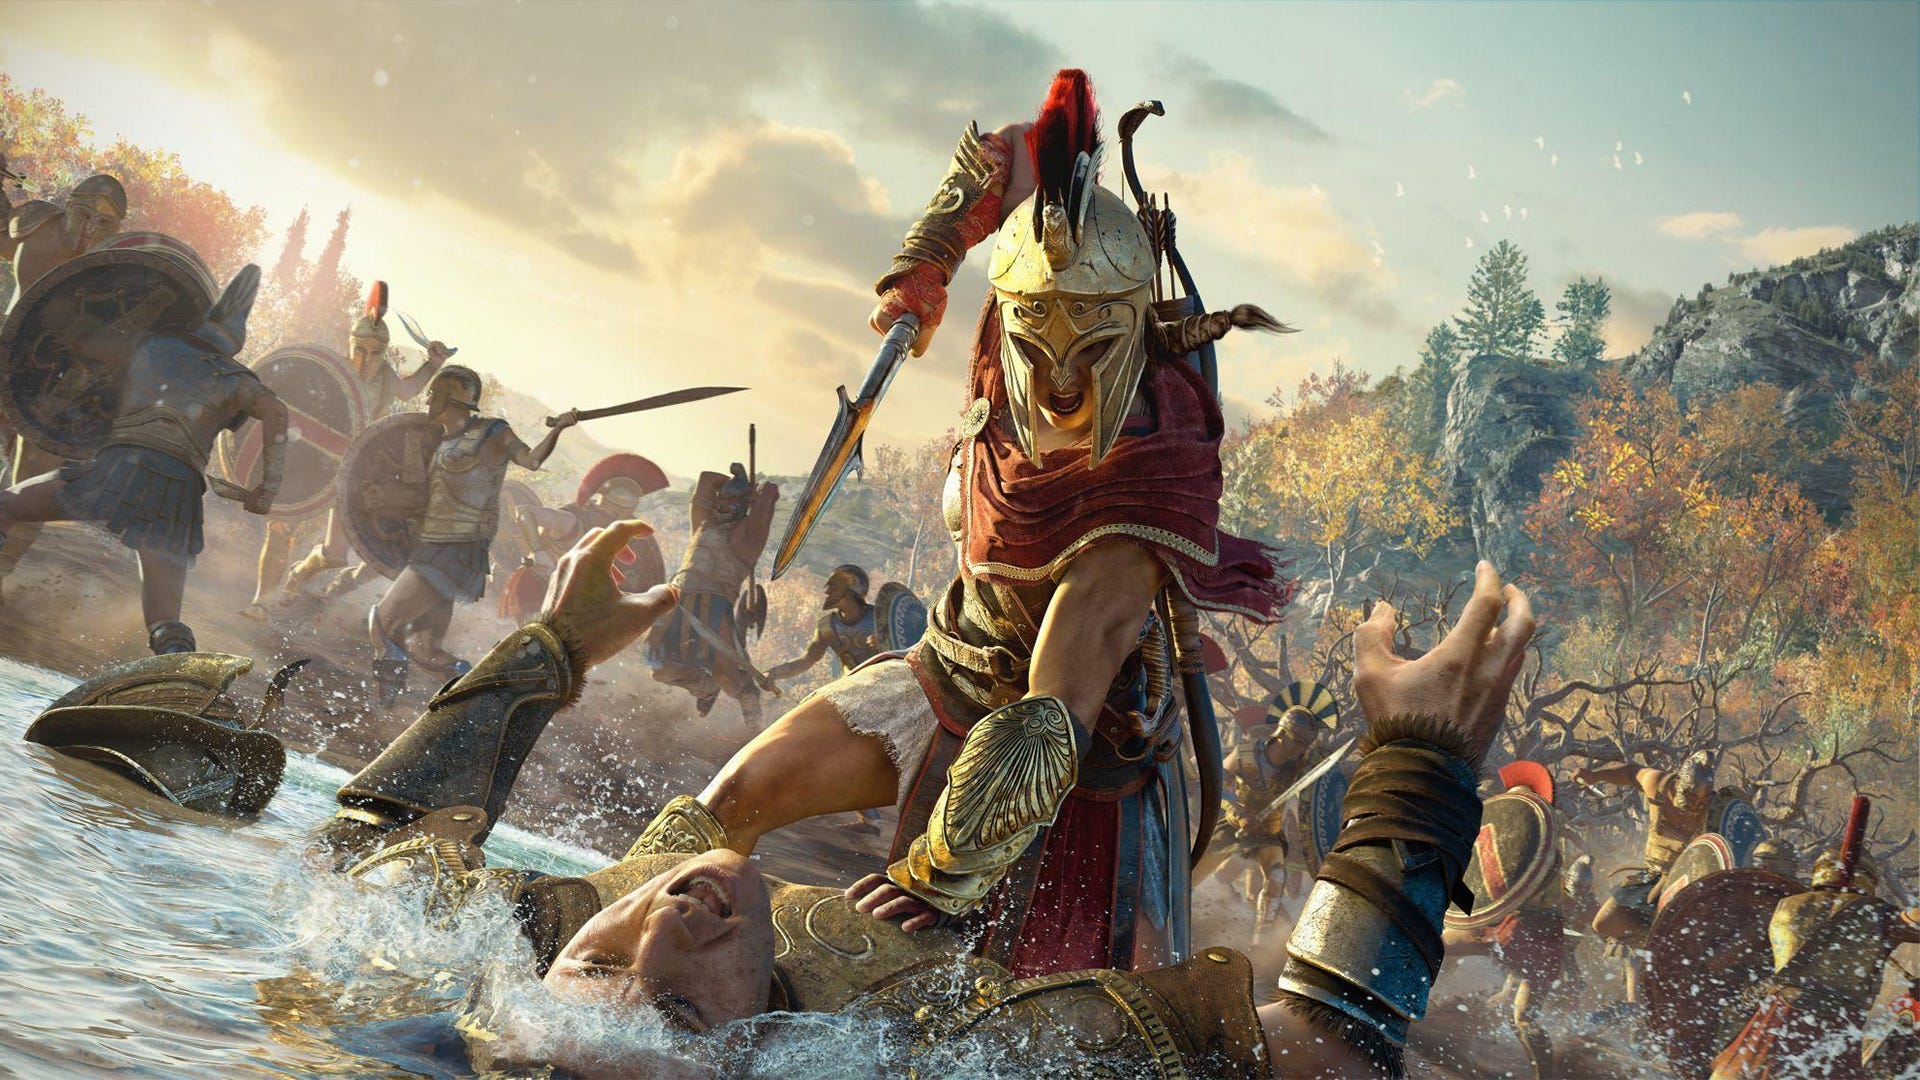 My big fat Greek adventuring: Assassin's Creed Odyssey review | Technobubble